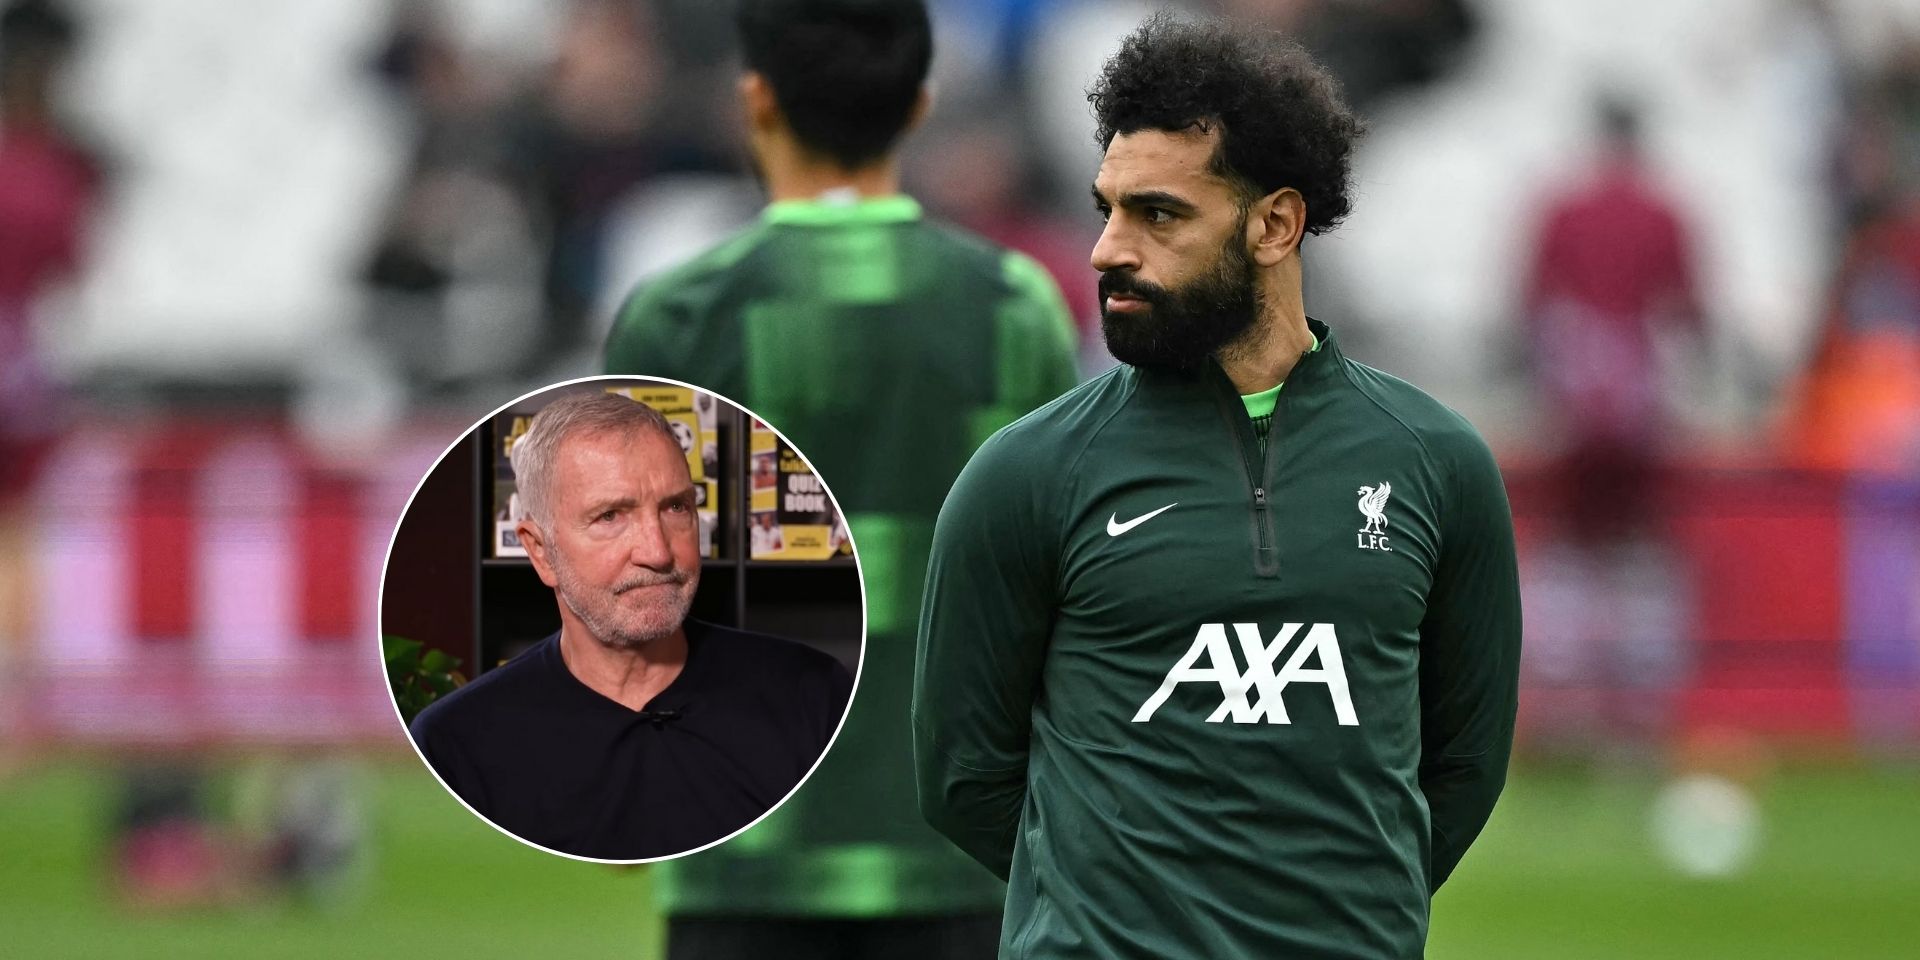 (Video) Souness questions whether Salah is ‘fully focused’ after injury return